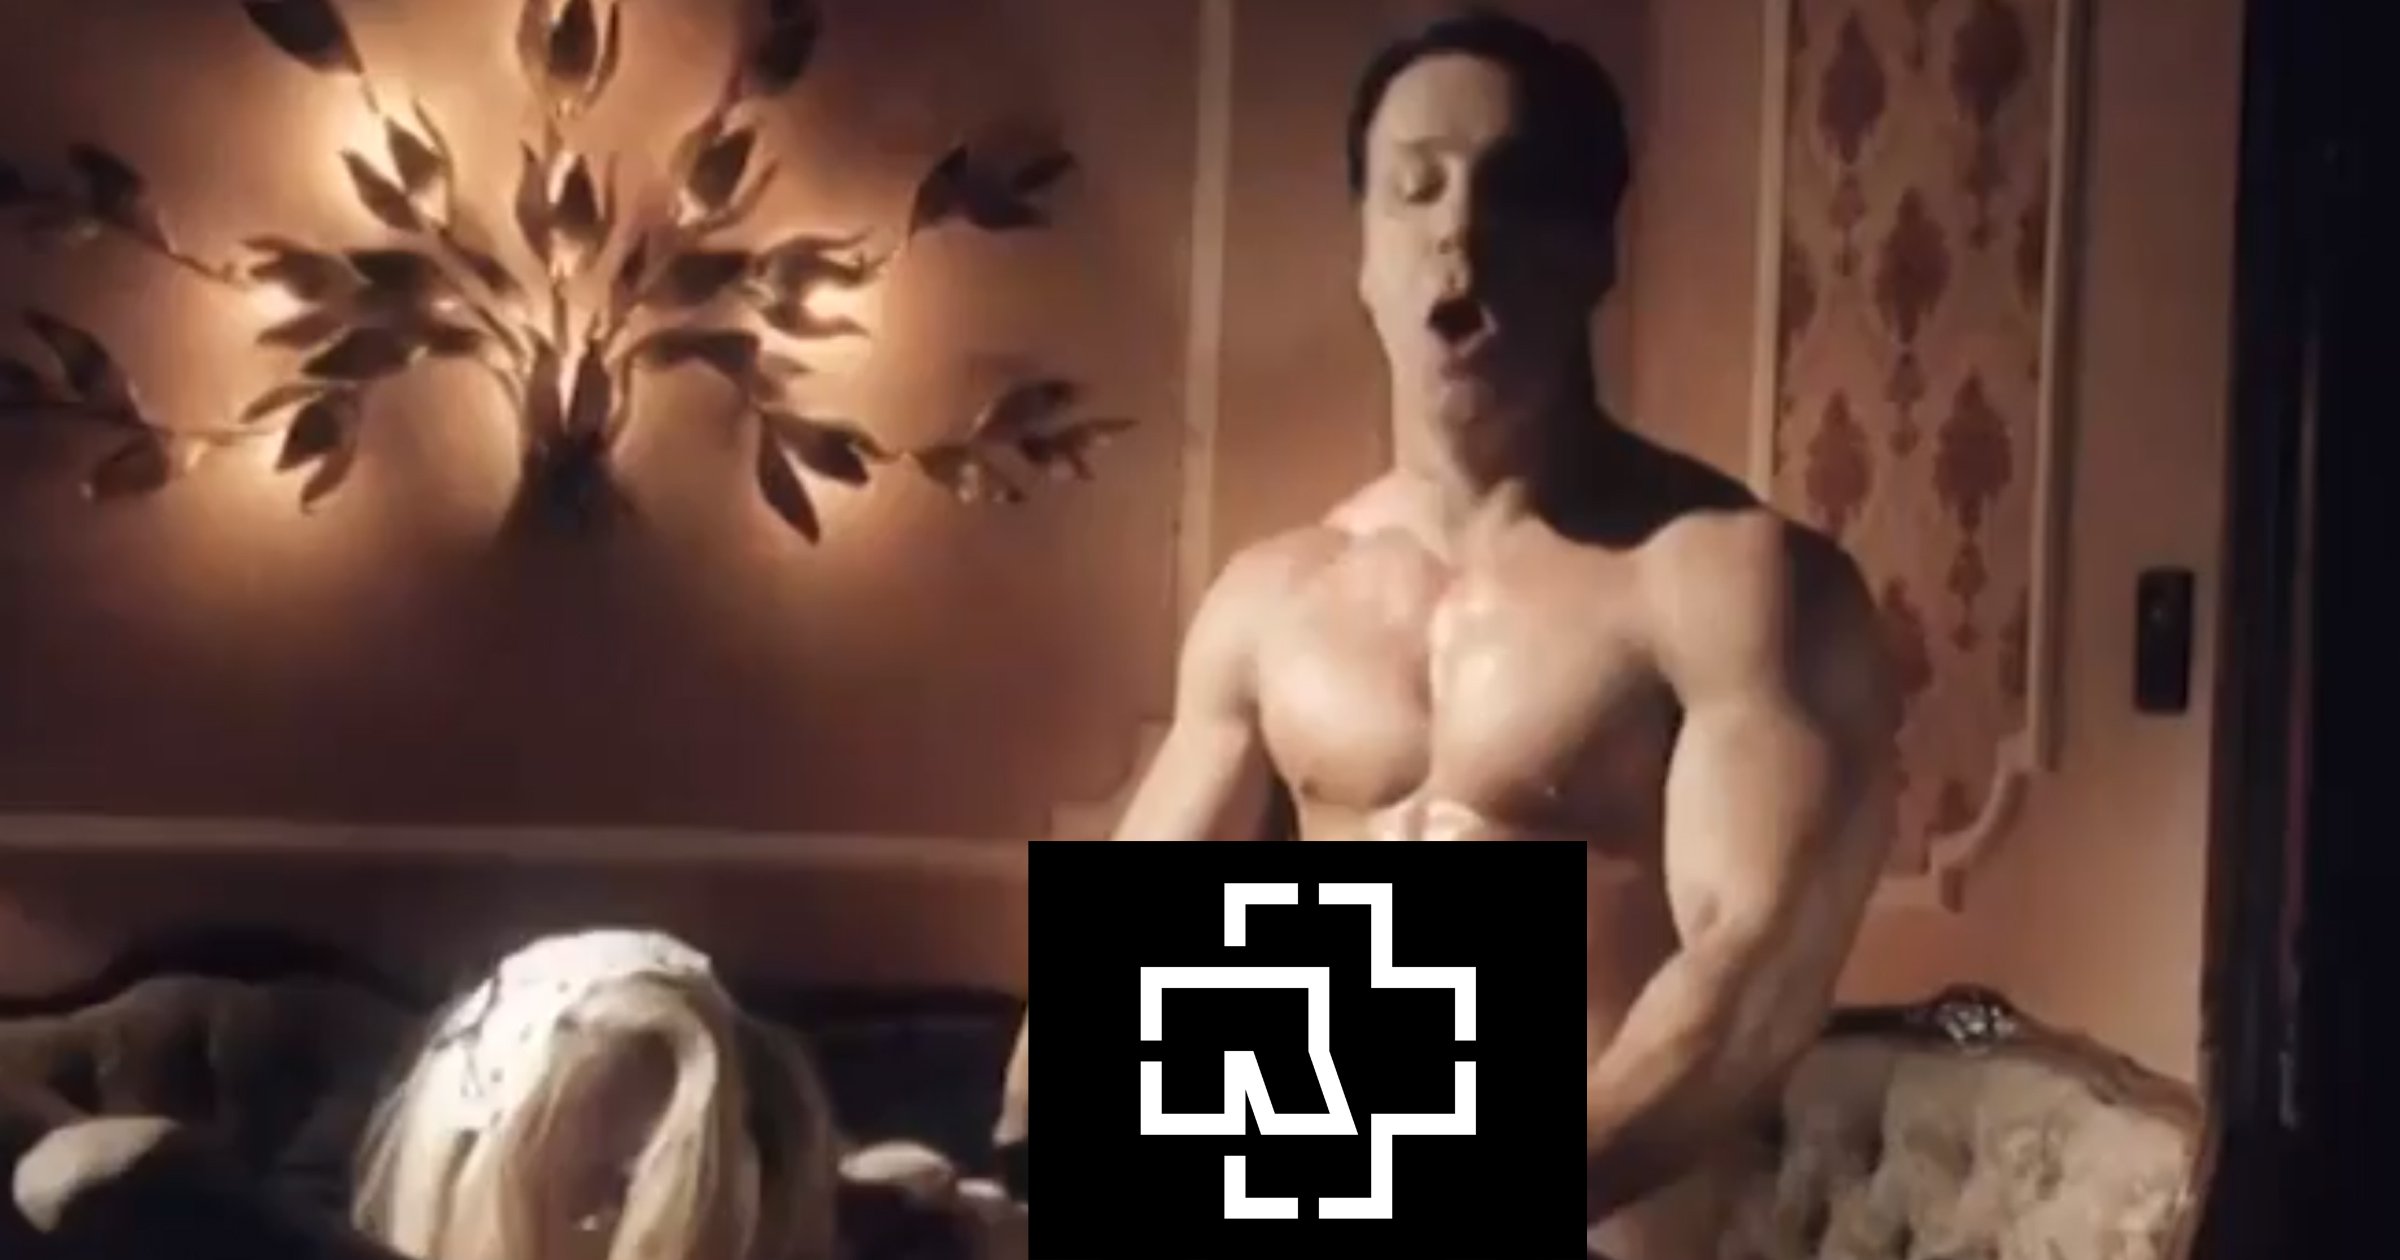 david herren recommends rammstein pussy music video pic